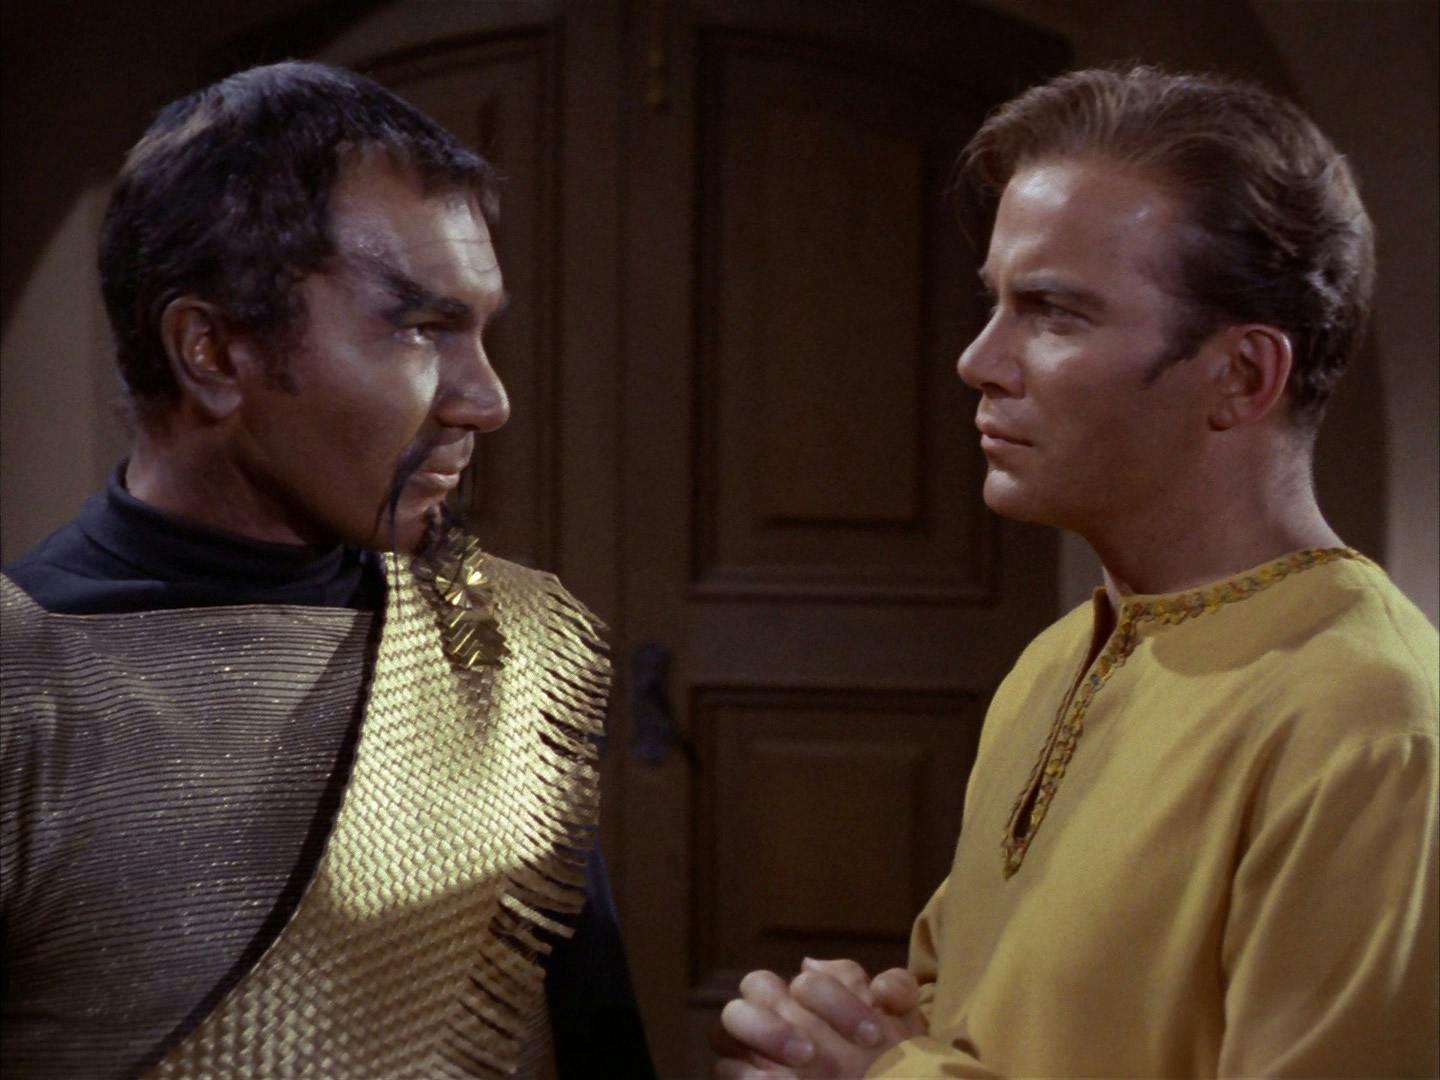 The Klingon Kor and James T. Kirk do not hide their disdain and differing ideologies from one another on the planet Organia in 'Errand of Mercy'